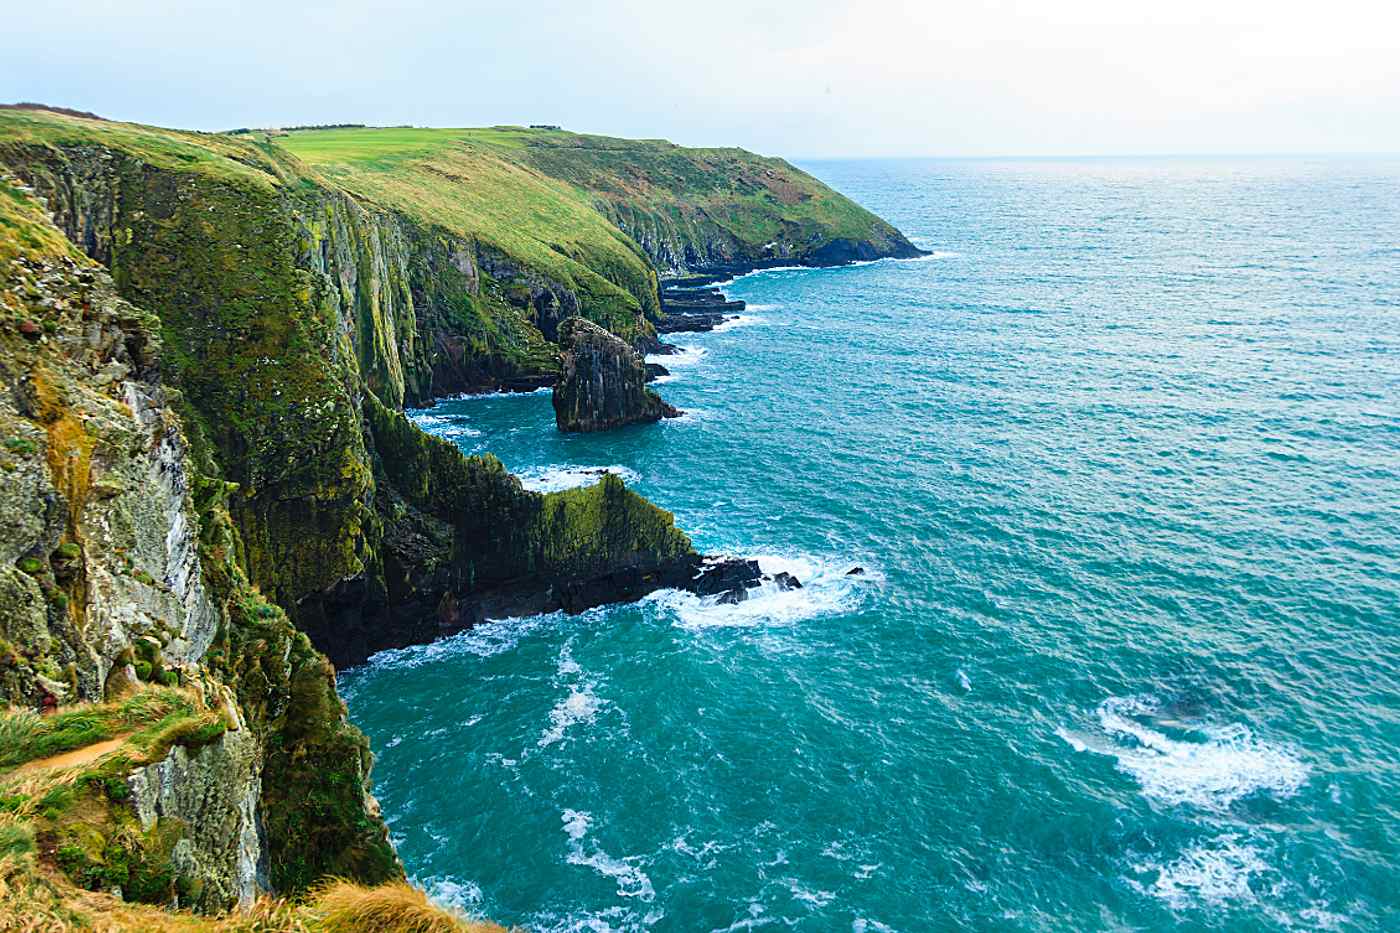 Magical Energy Awaits You In Ireland During This 2022 Yoga Retreat